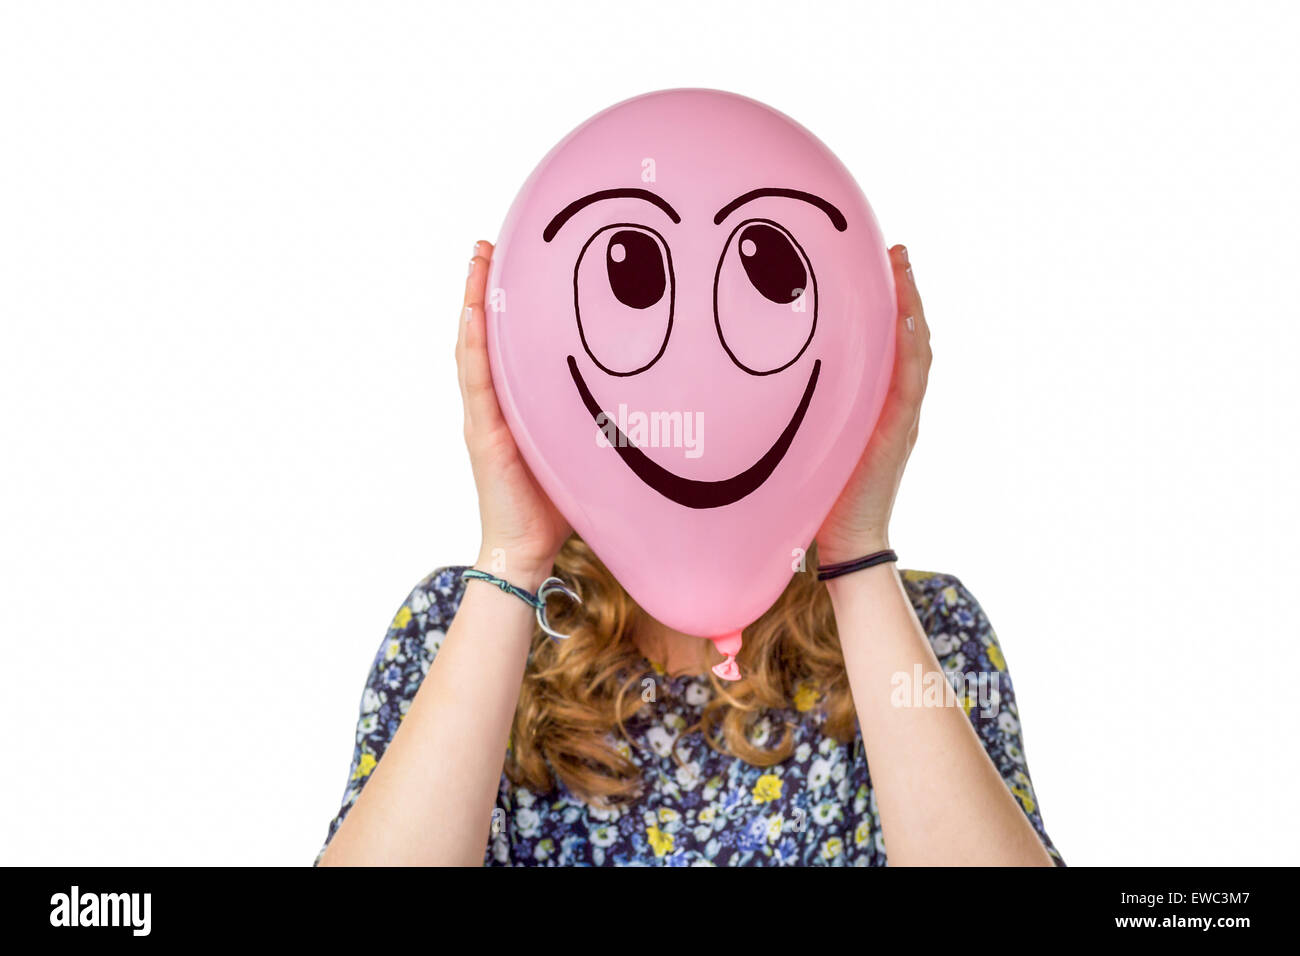 Girl holding pink balloon with smiling facial expression Stock Photo